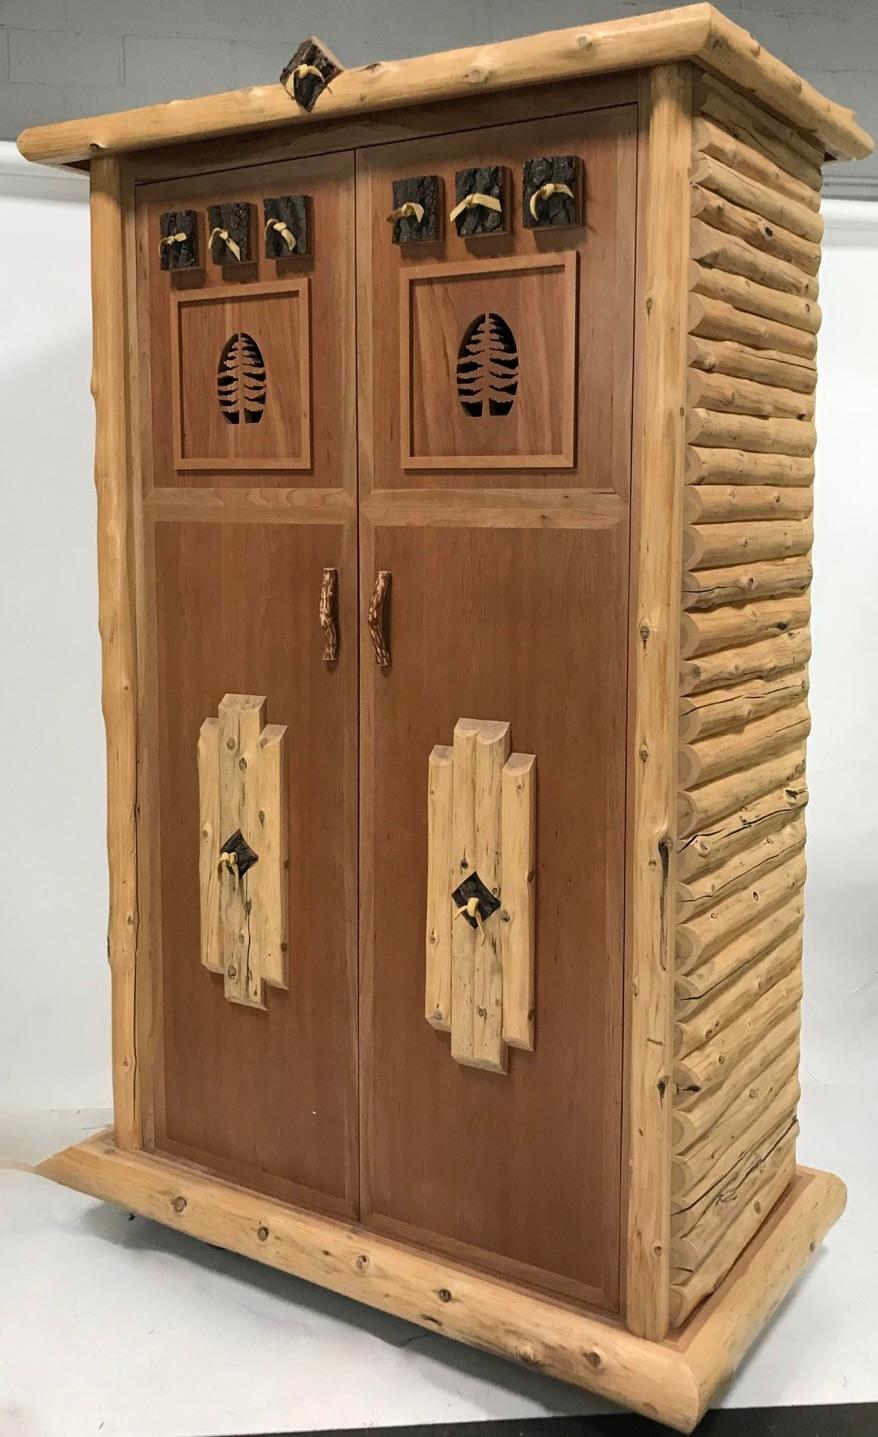 This rustic dresser/armoire is perfect for Aspen, Sun Valley, Jackson Hole, Vail and Santa Fe dwellers who bask in the ambiance of a rustic interior. But you don't have to live in one of those places to enjoy the elegance of this sturdy piece. This